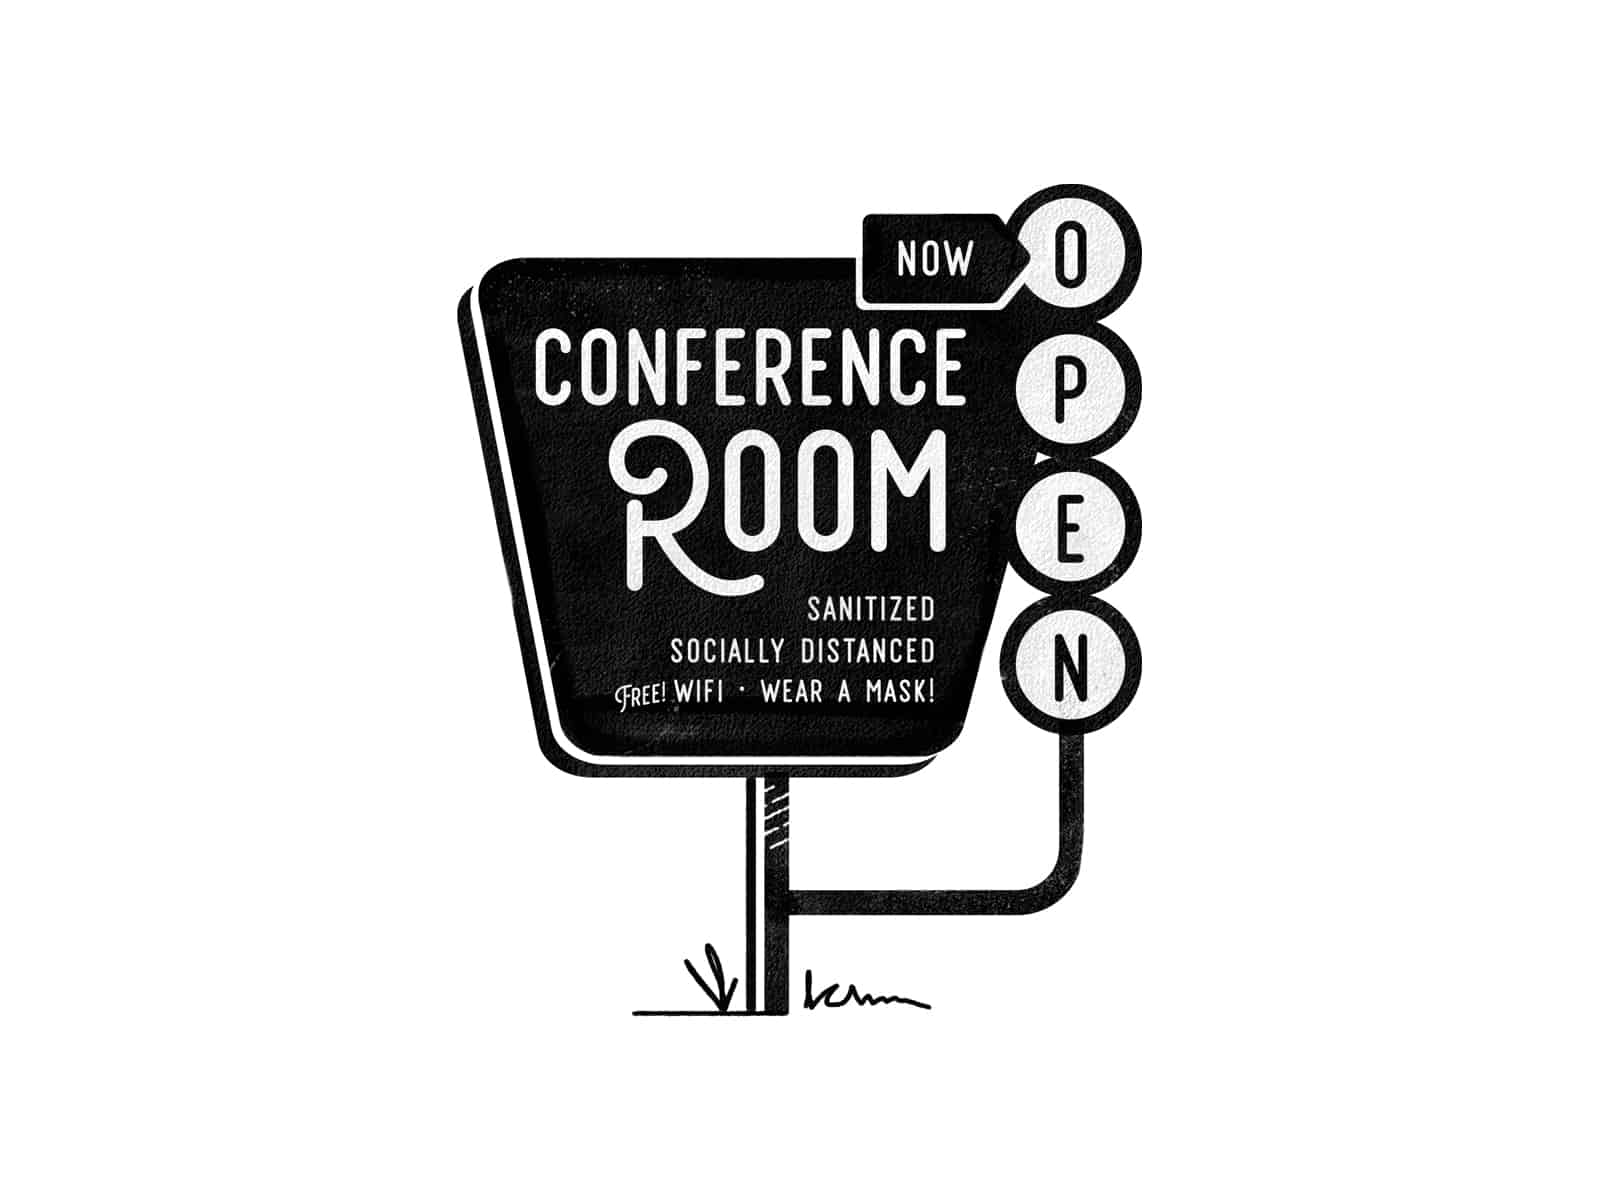 Conference Room sign for running efficient meetings